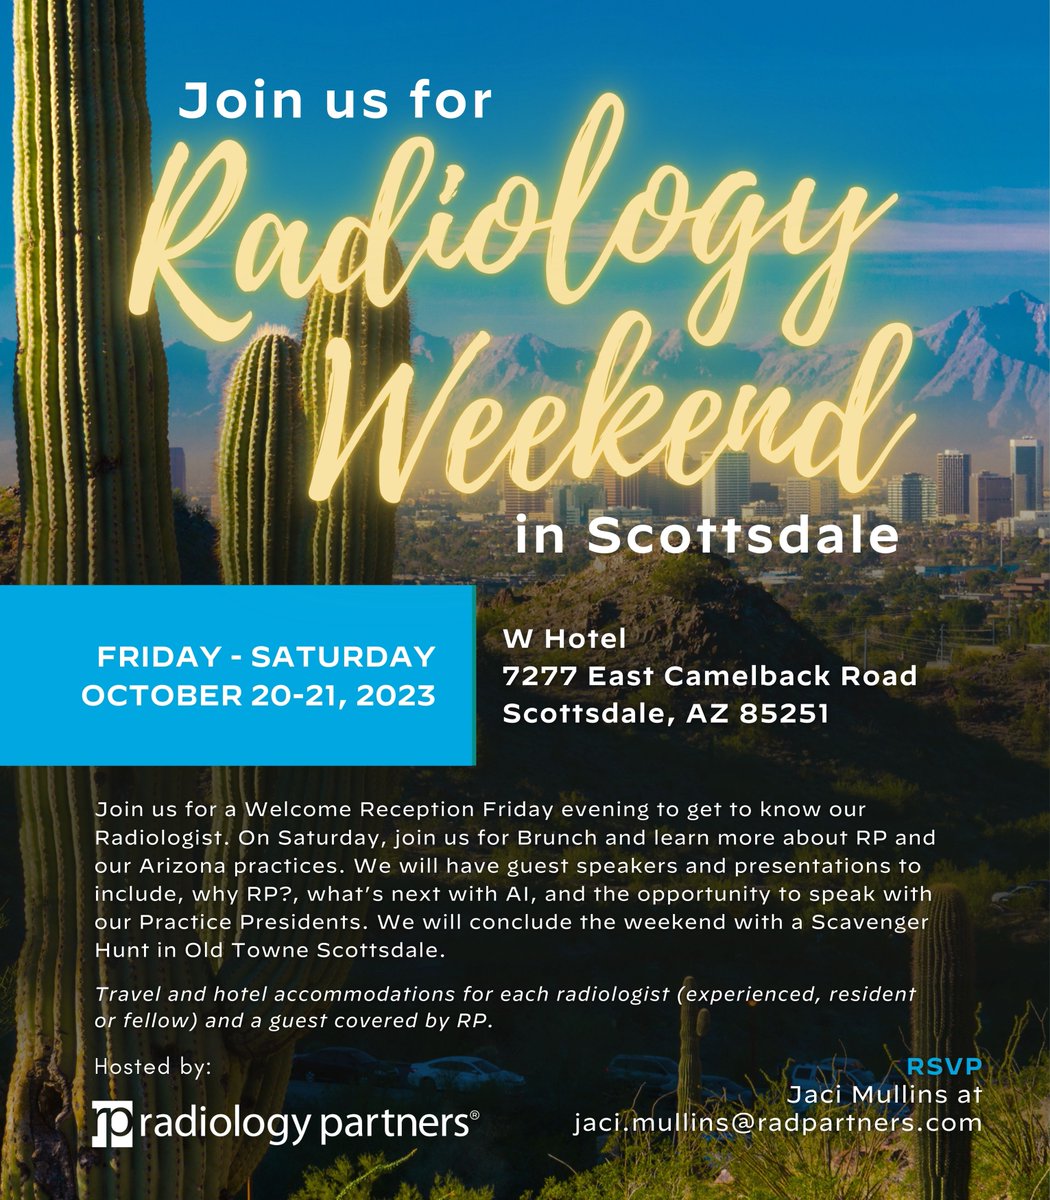 Come spend the weekend in Scottsdale! 

Join us Oct 20-22nd at the W to find your fit with one of our RP Practices! tinyurl.com/47tuhryb

#RadiologistJobs #JoinOurTeam #RadiologyCareer #RadRes #RadFellow #TransformingRadiology #USRad #NeuroRad #IRRAD @teachplaygrub #RPWest